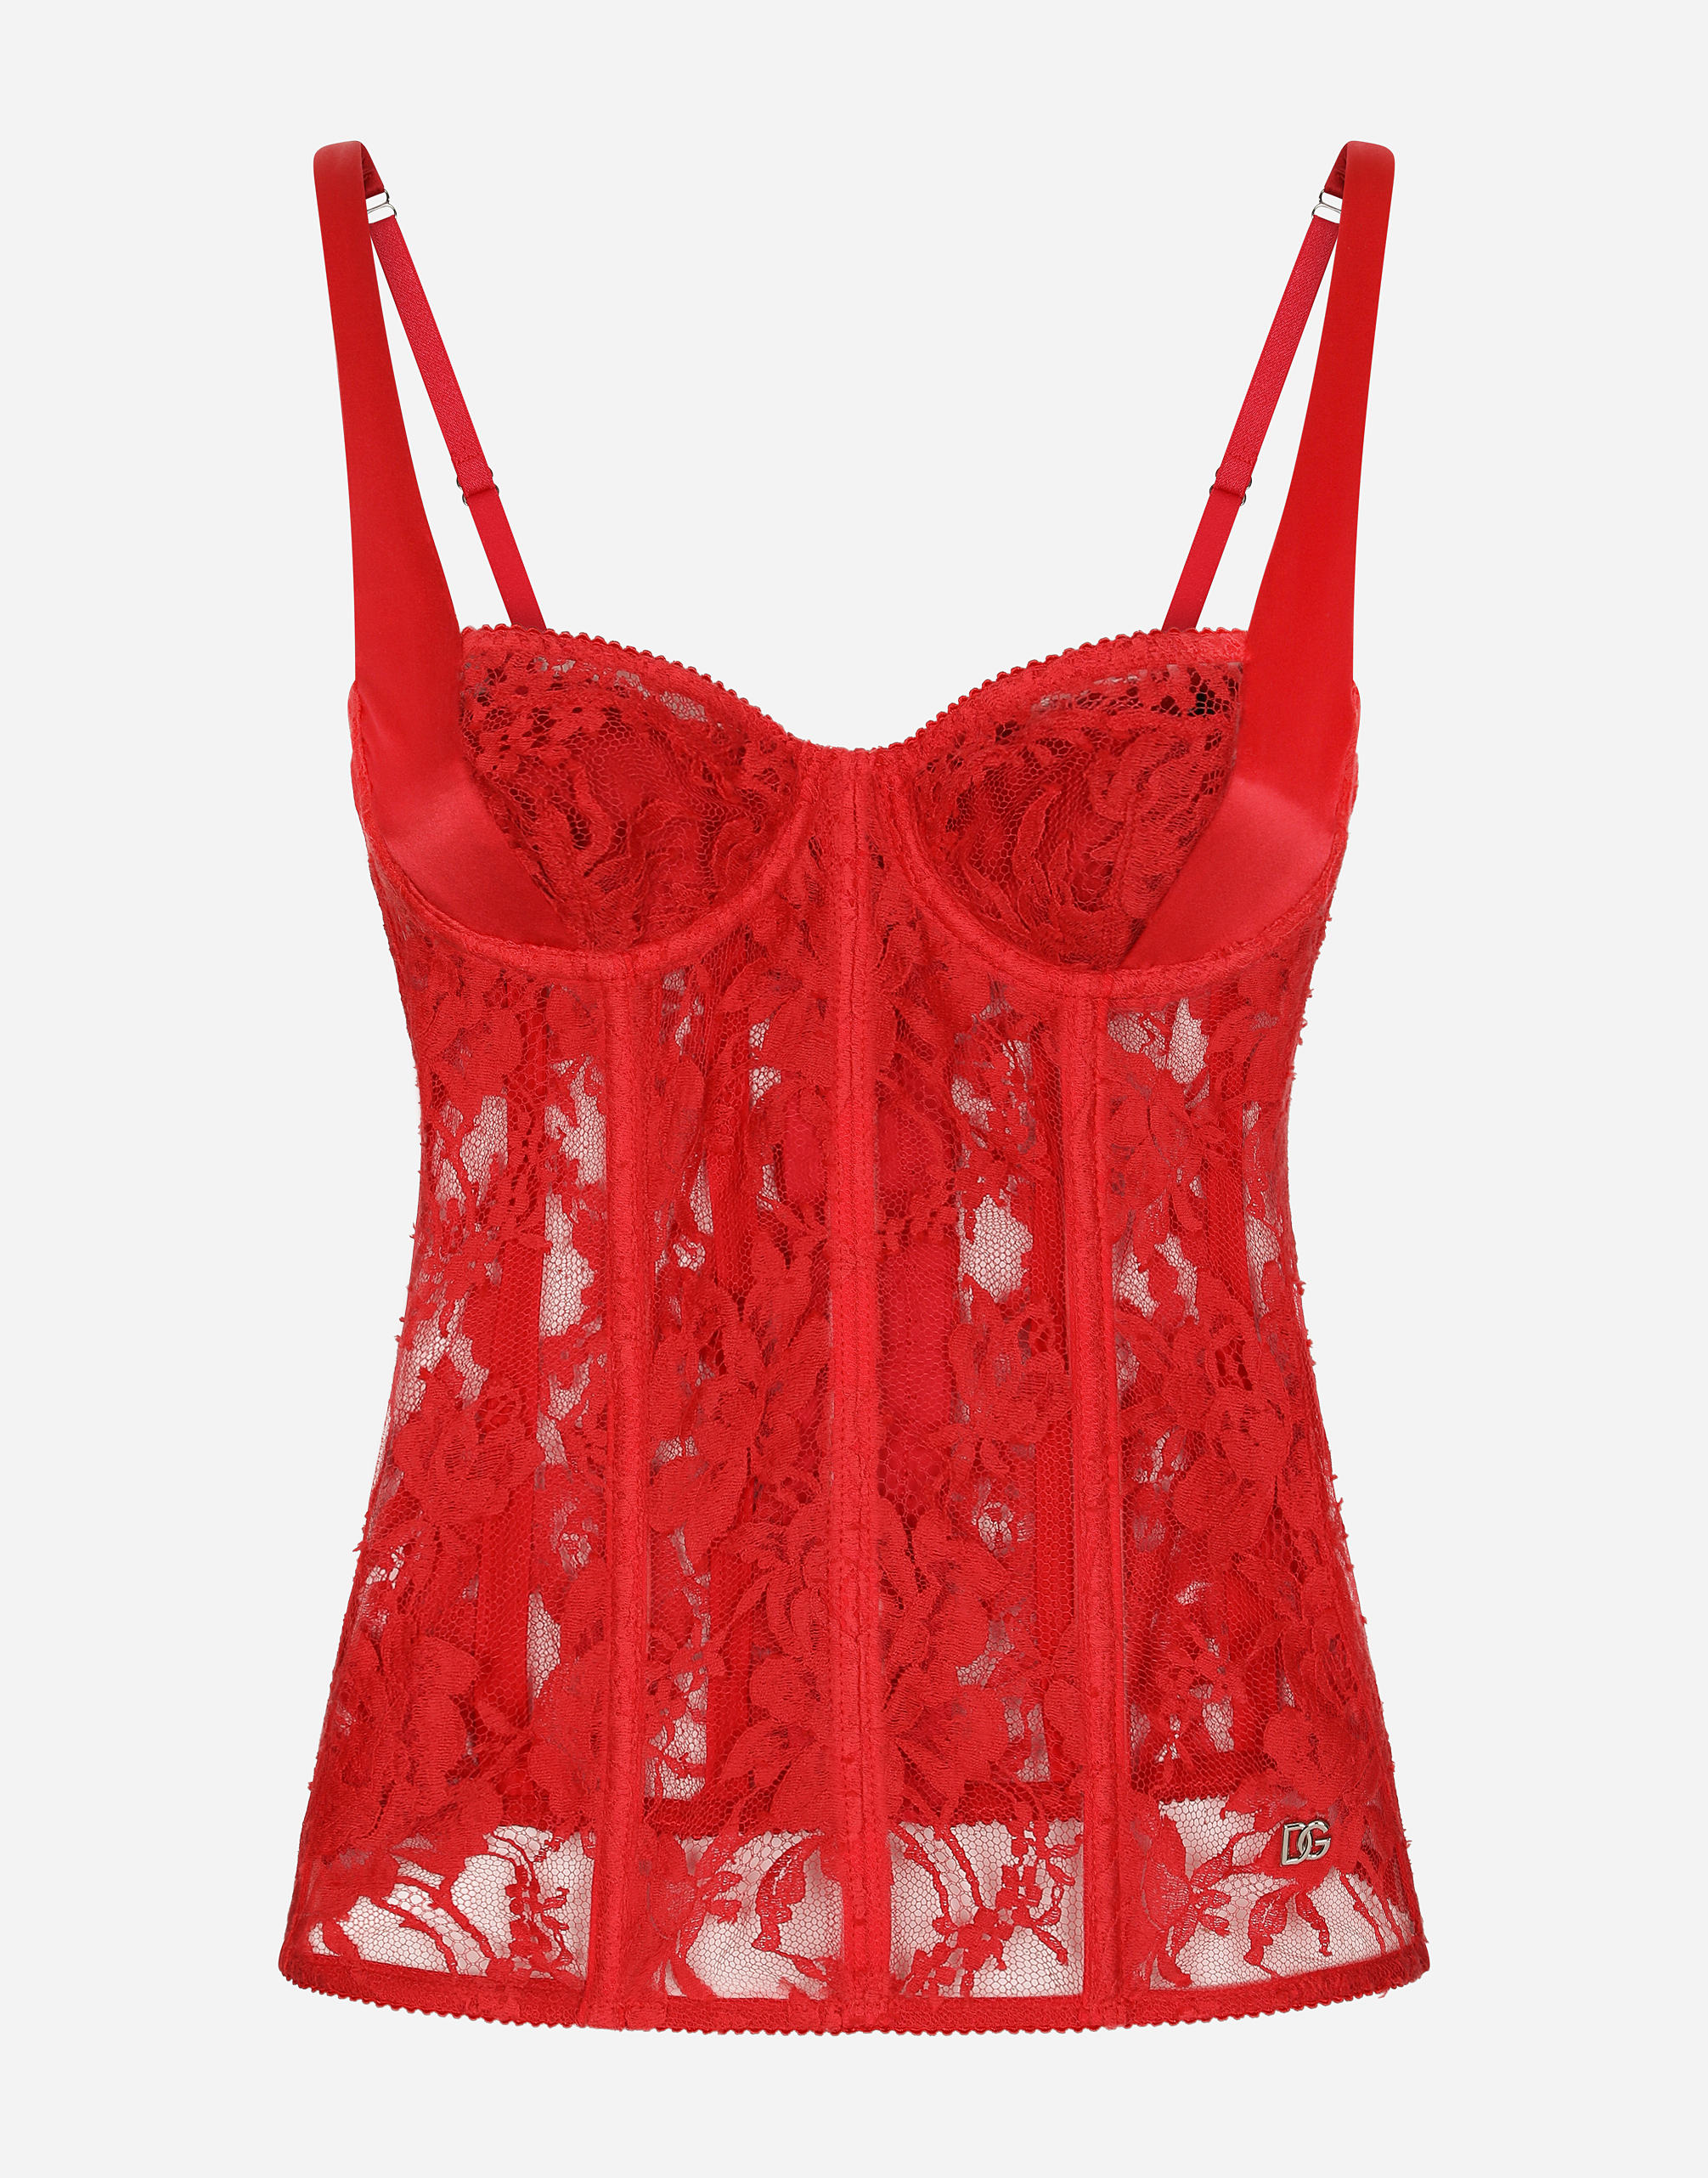 Dolce & Gabbana Lace Lingerie Corset In Red